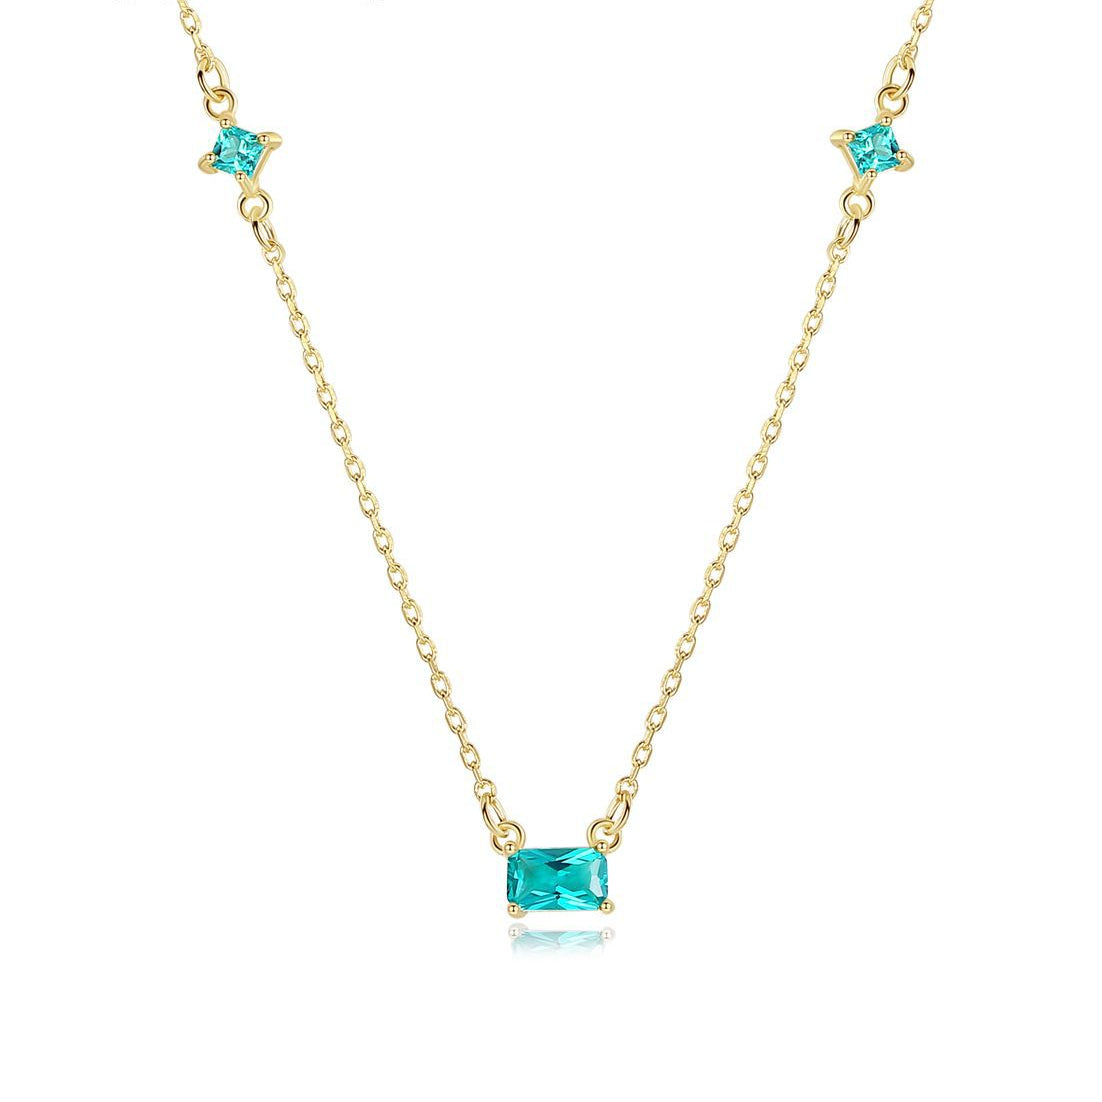 Gemstonely- S925 Silver Necklace with Synthetic Green Gemstone Pendant on Lock Chain for Office Ladies in Chic and Elegant Design